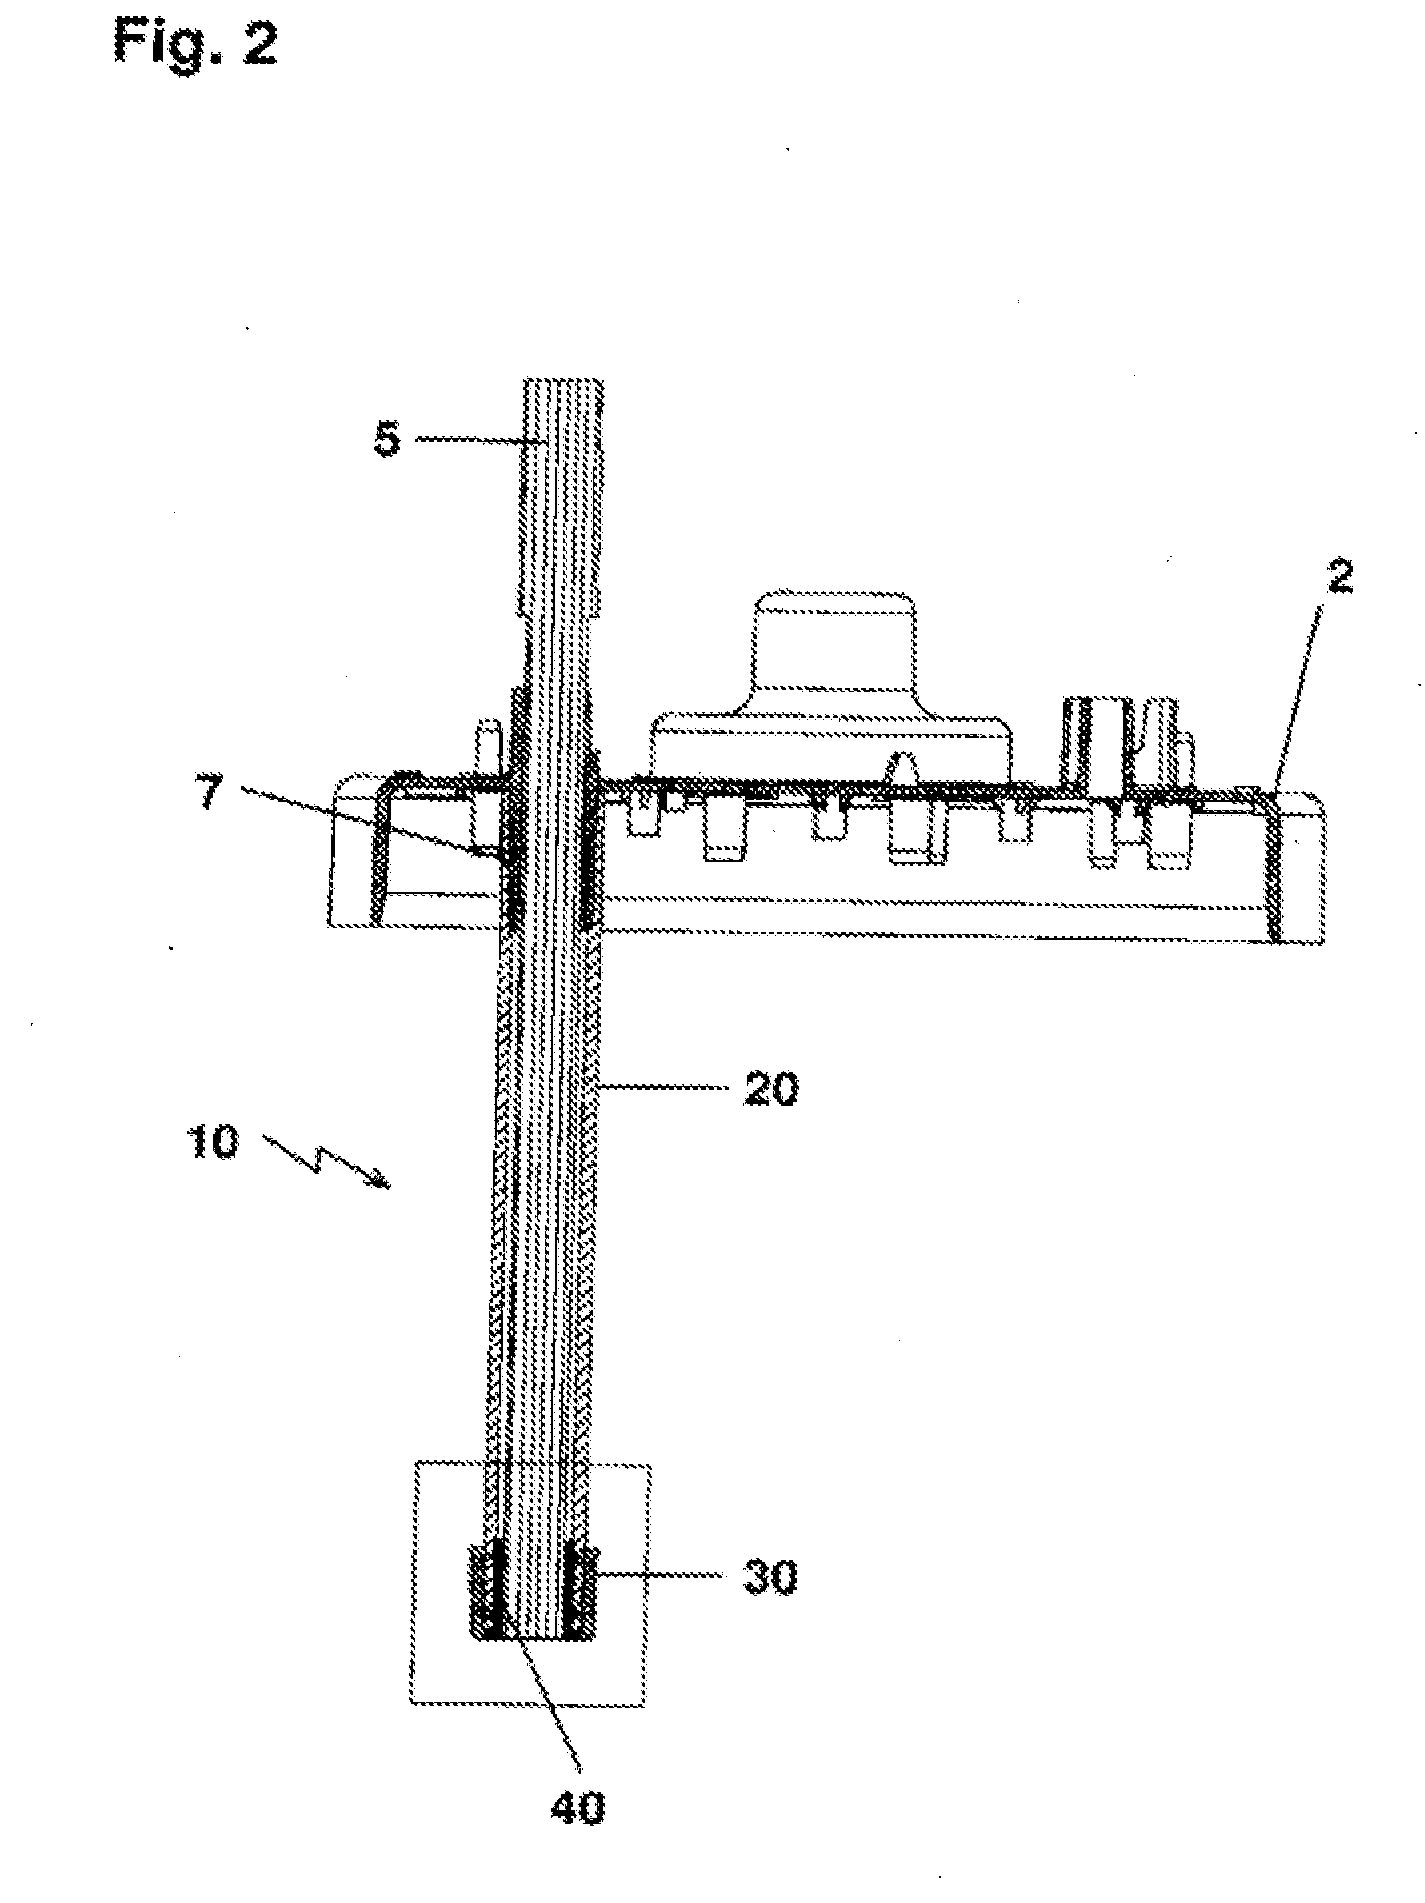 Sensor adapter, method for the manufacture thereof, method for the use of a sensor in this sensor adapter and bioreactor with this sensor adapter